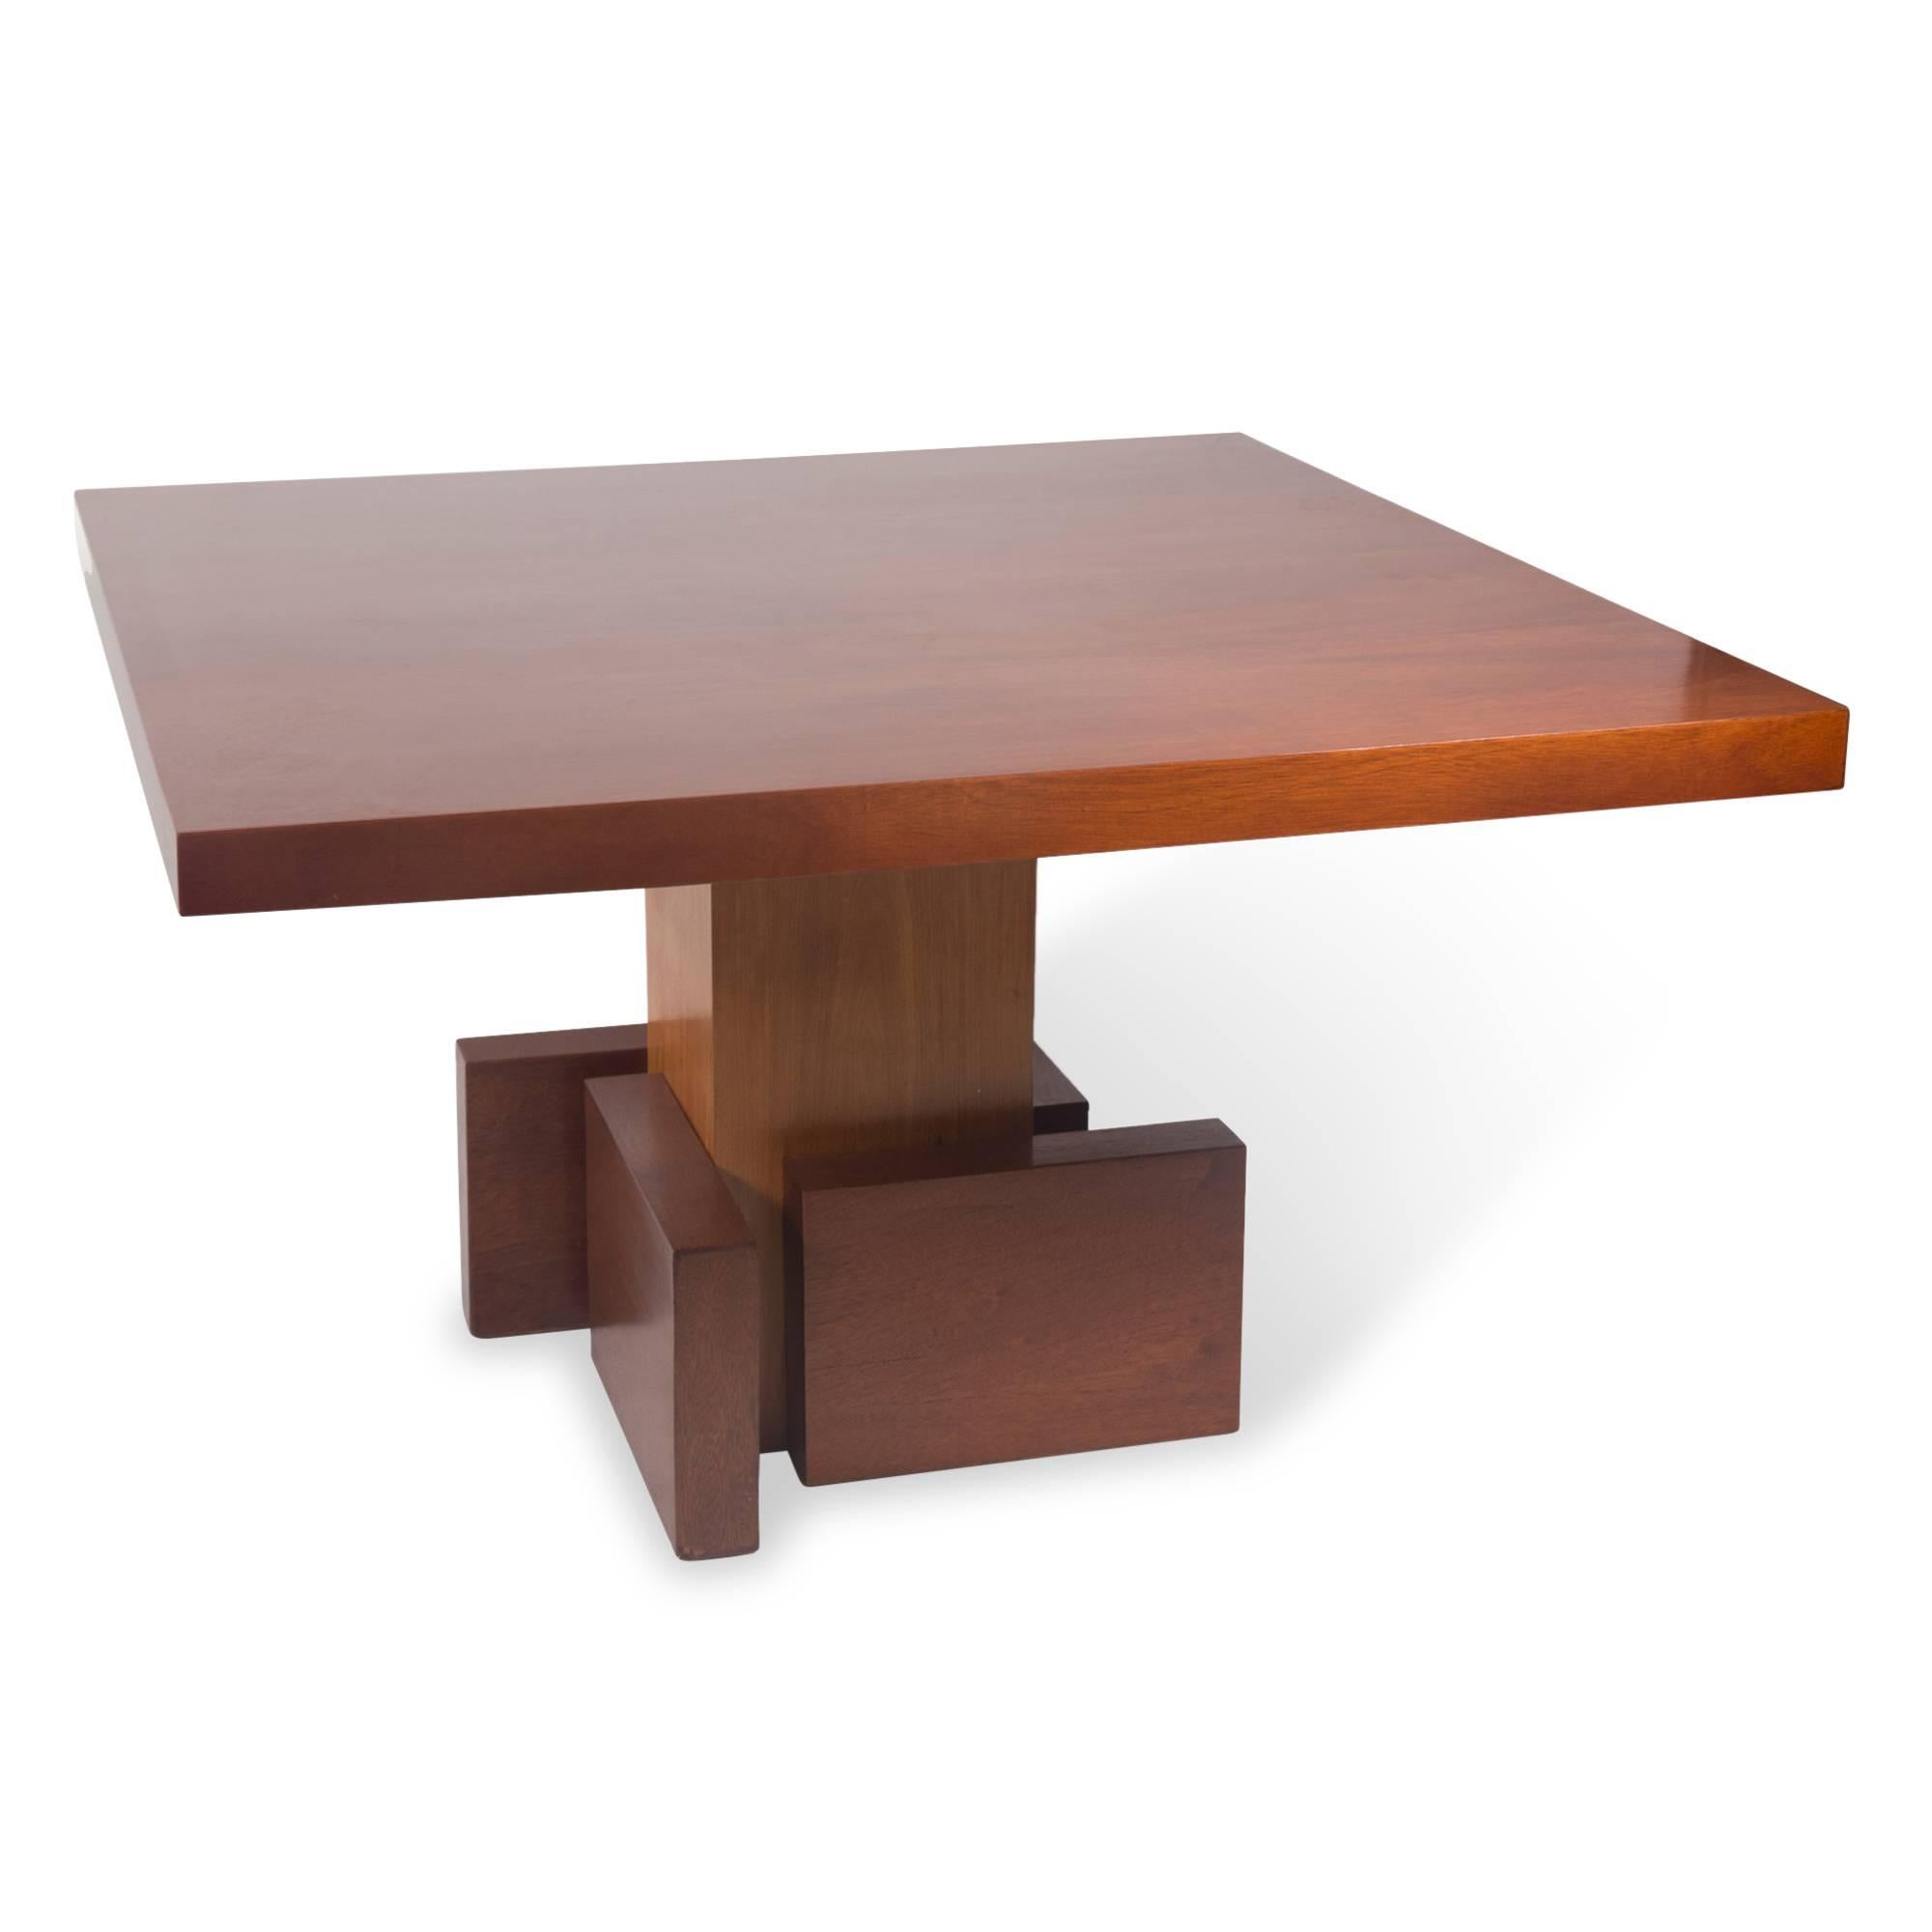 Square mahogany dining or kitchen table, the surface mounted on a staggered cubist inspired pedestal base, France, 1930s. Measures: 47 in square, height 29 in.